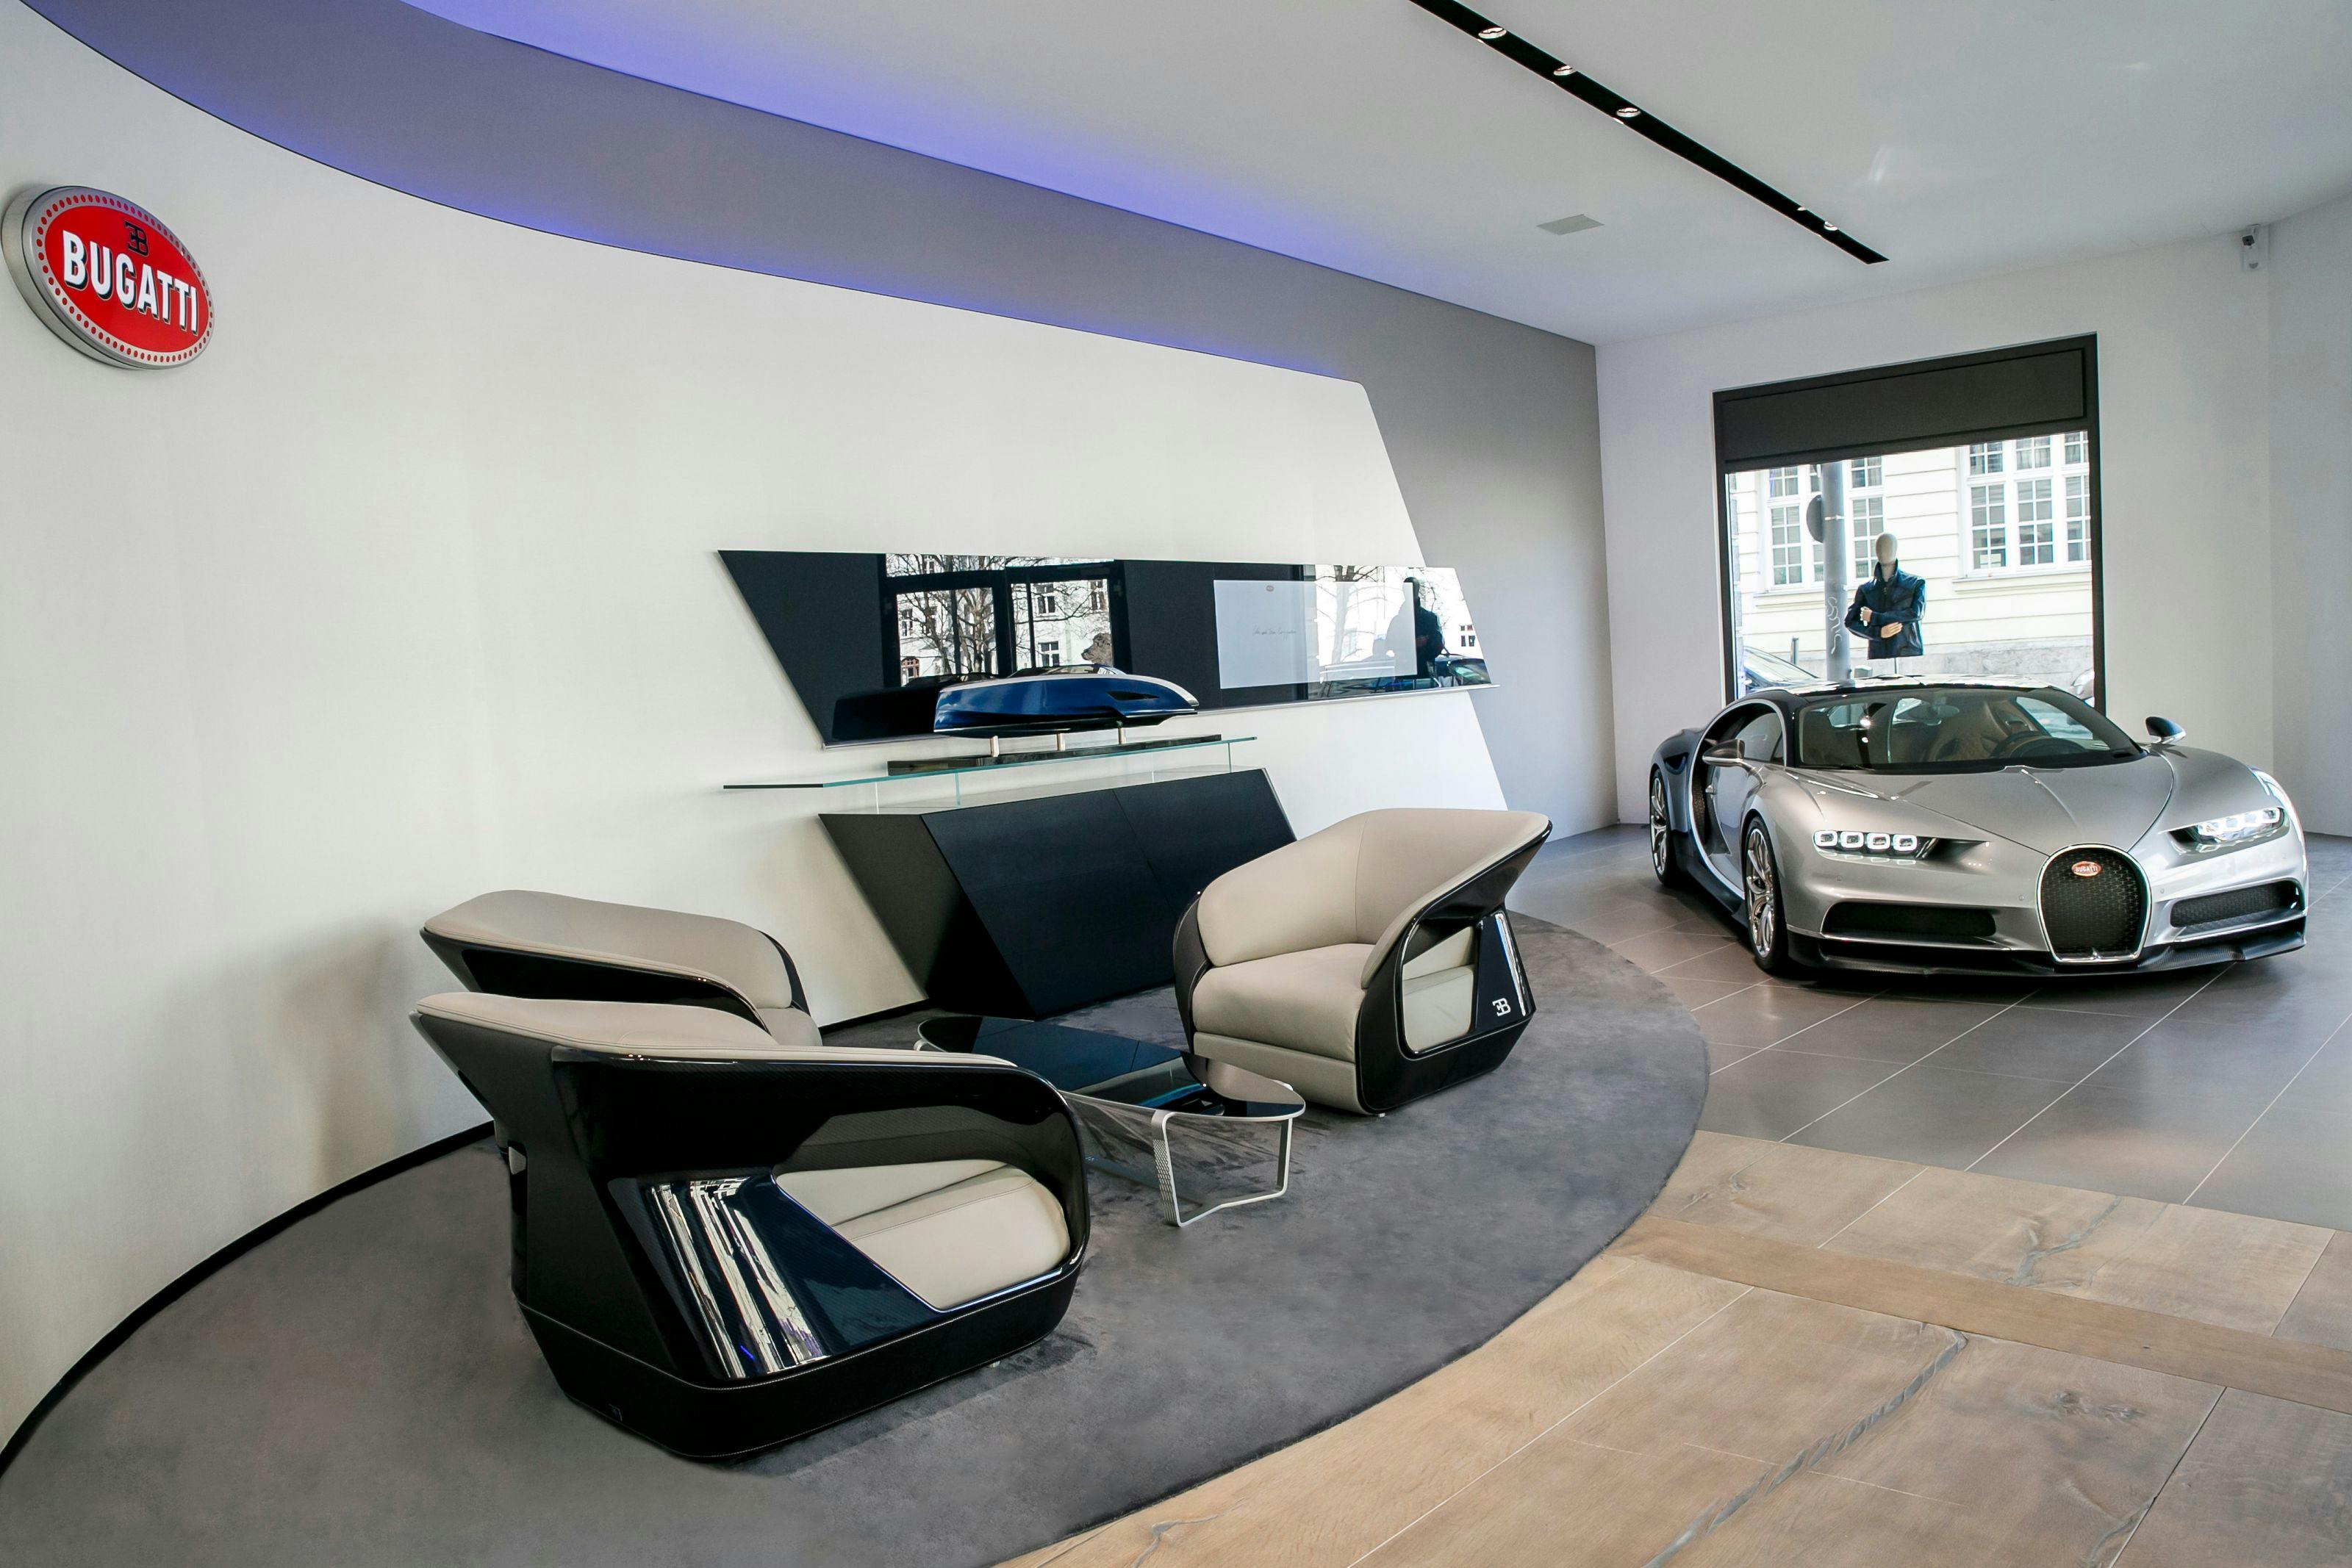 Bugatti opens a new location for luxury automobiles in Munich with a showroom and a lifestyle boutique